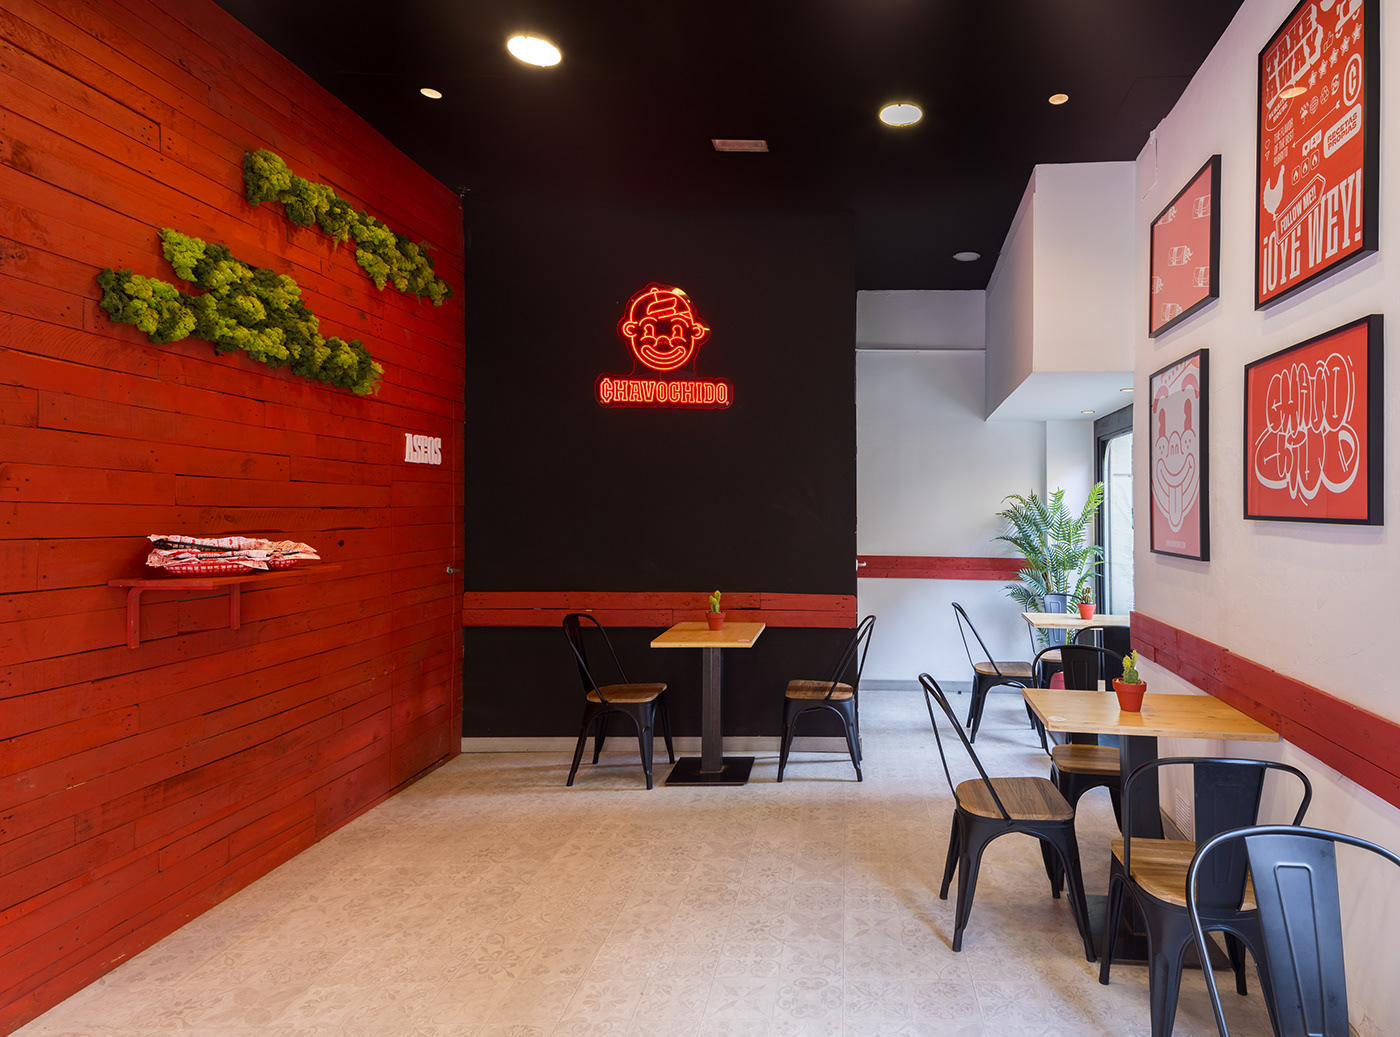 Naming, branding and web project for a fast food restaurant chain.